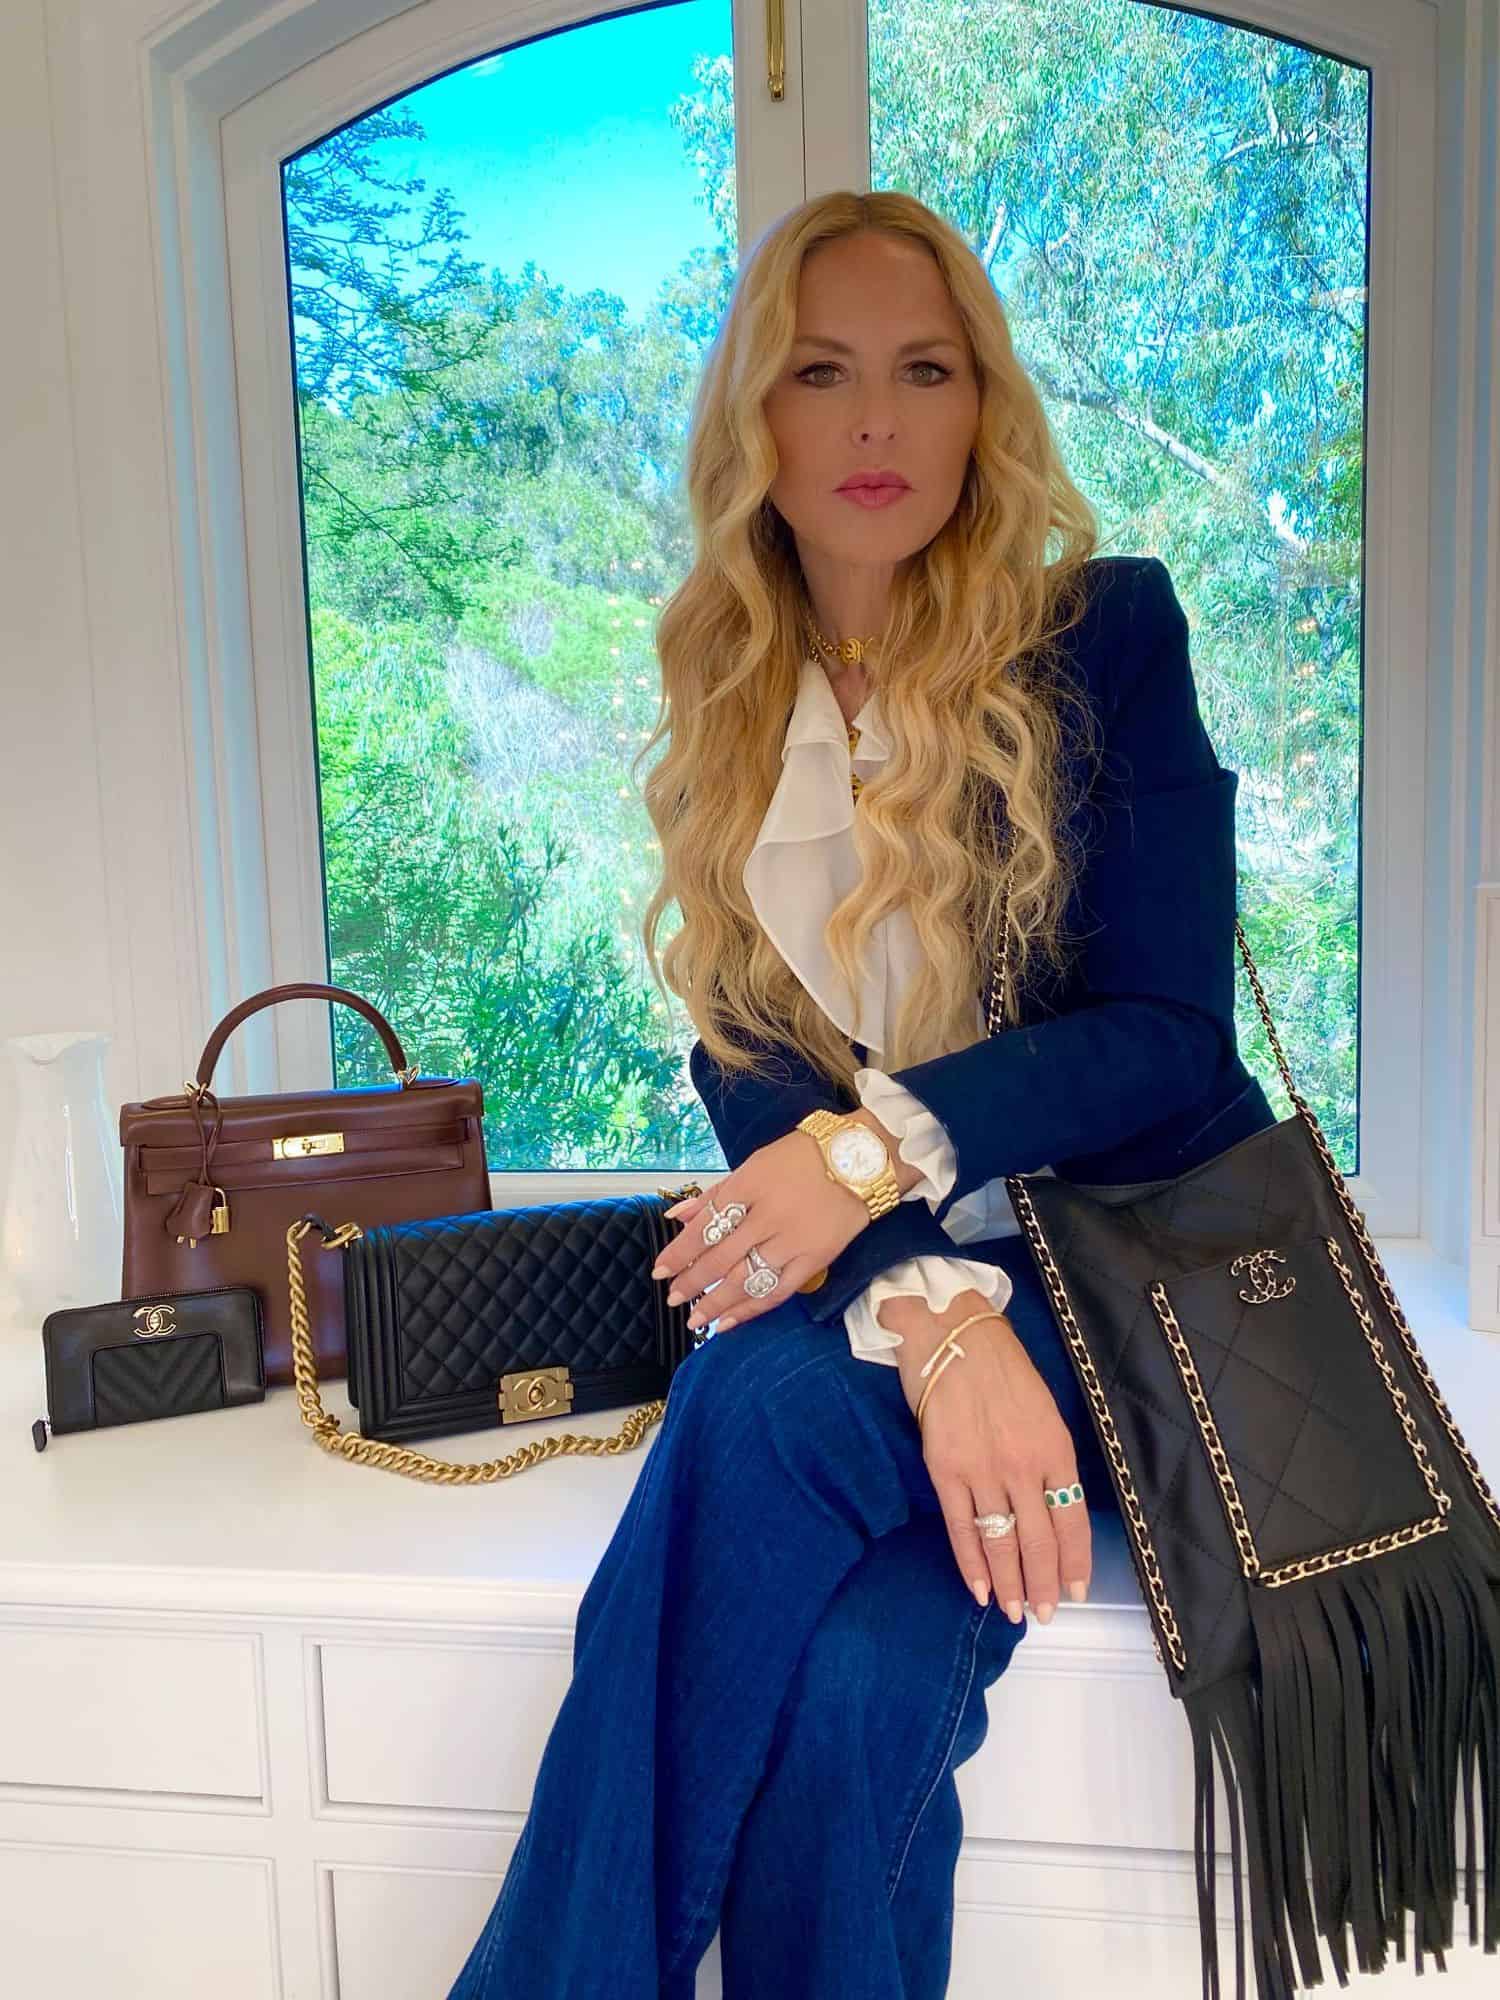 Rachel Zoe Shares Key Fashion Tips & Reveals The Must-Have